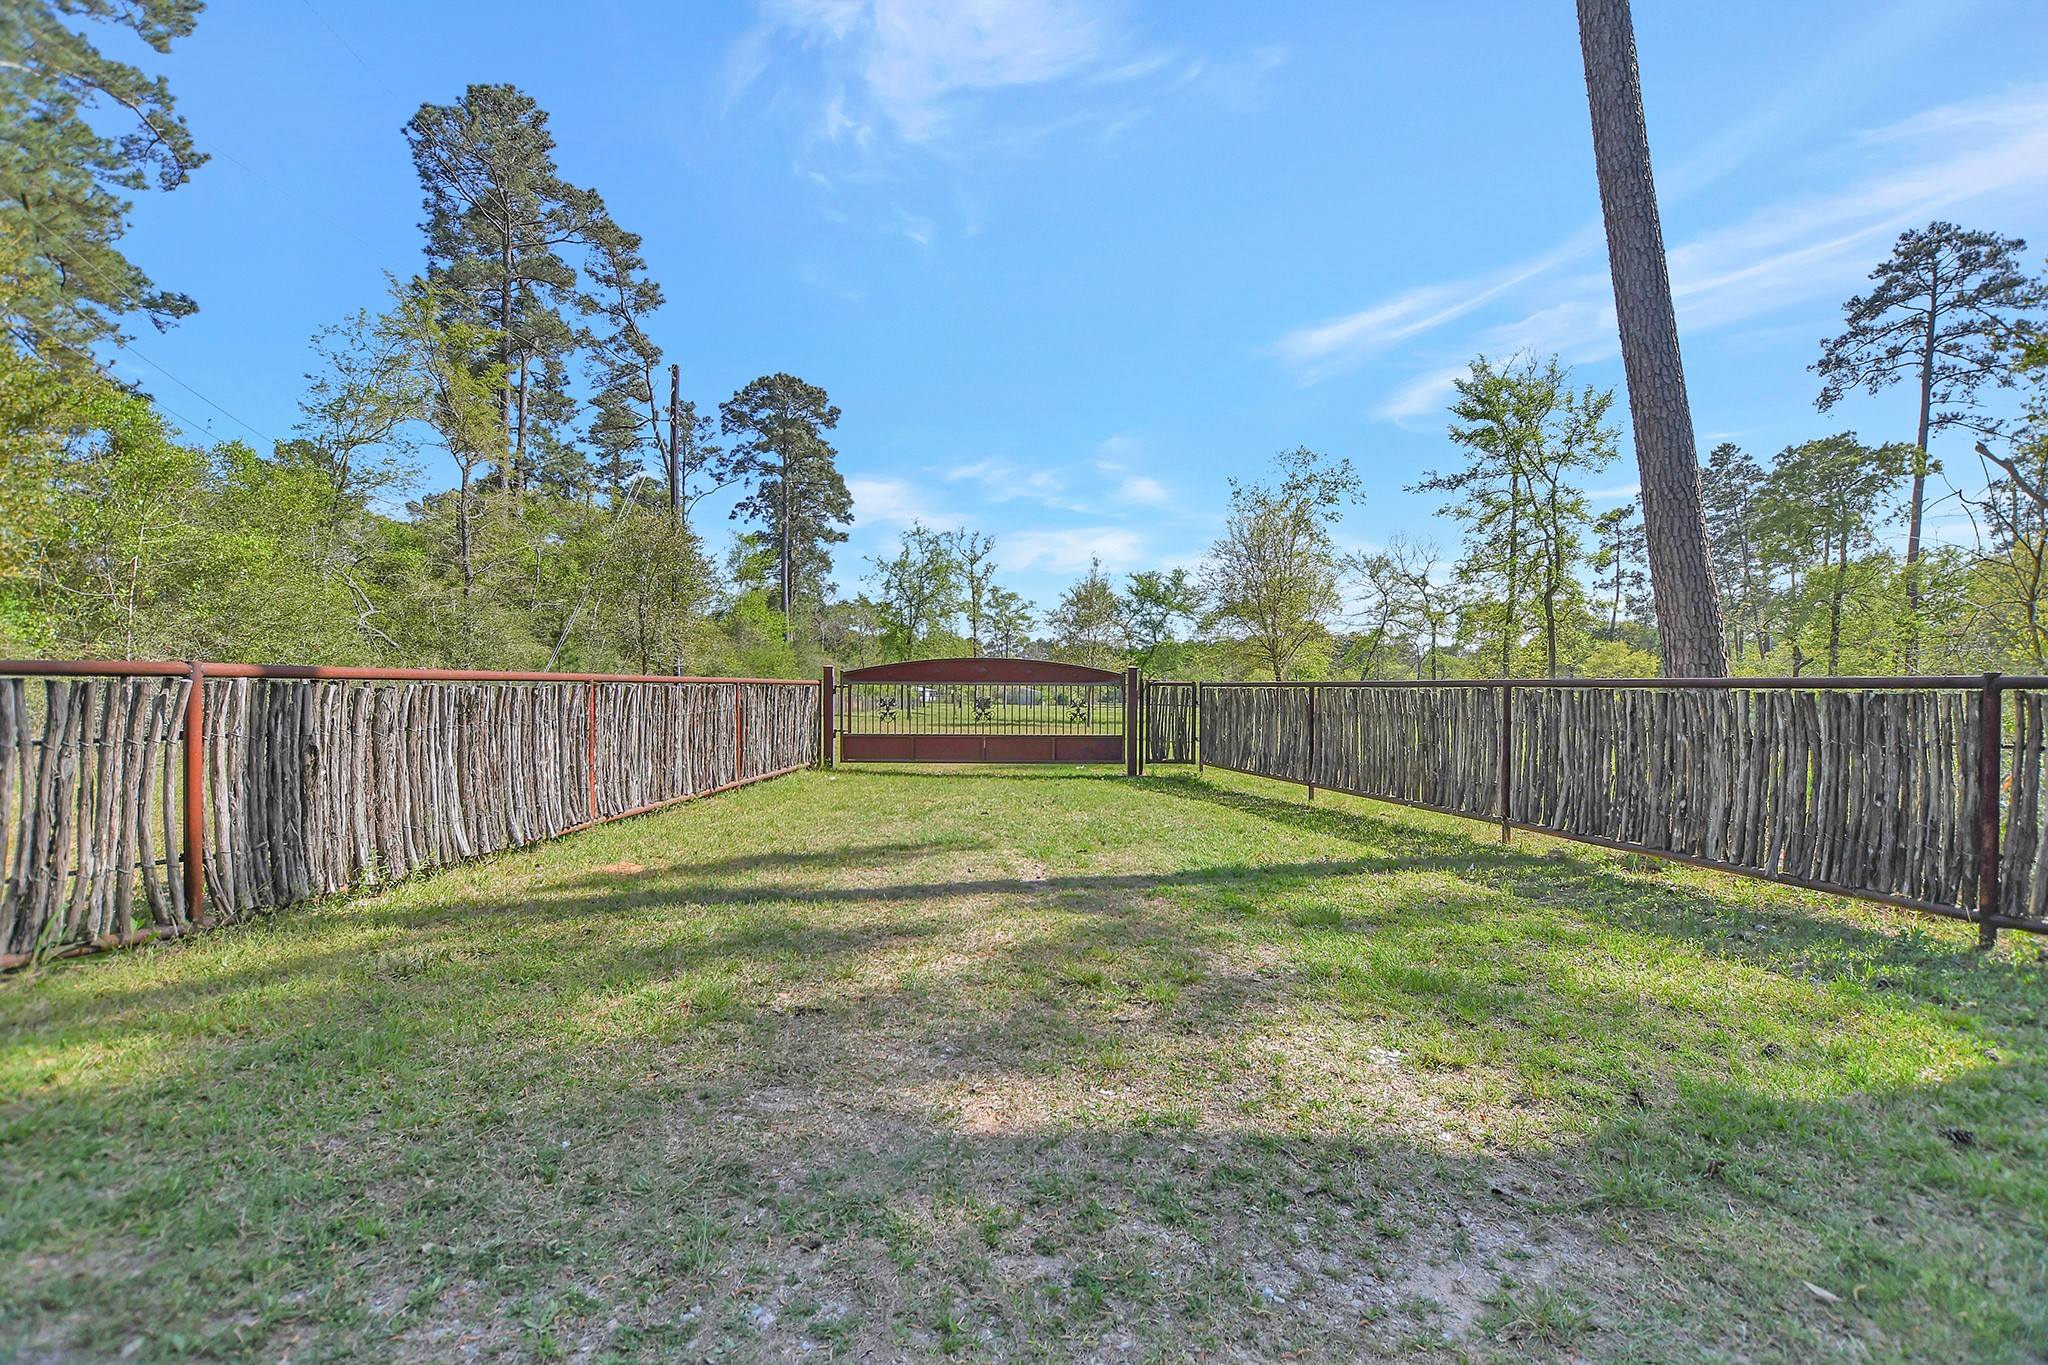 This inviting entry leads to your future 3 +/- acre homesite in Stagecoach Farms.